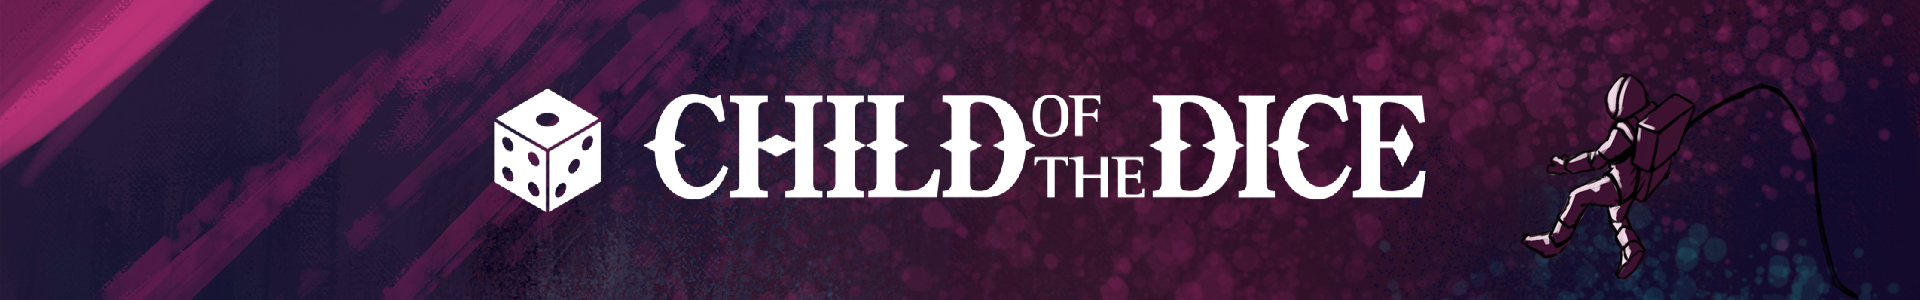 Child Of The Dice banner